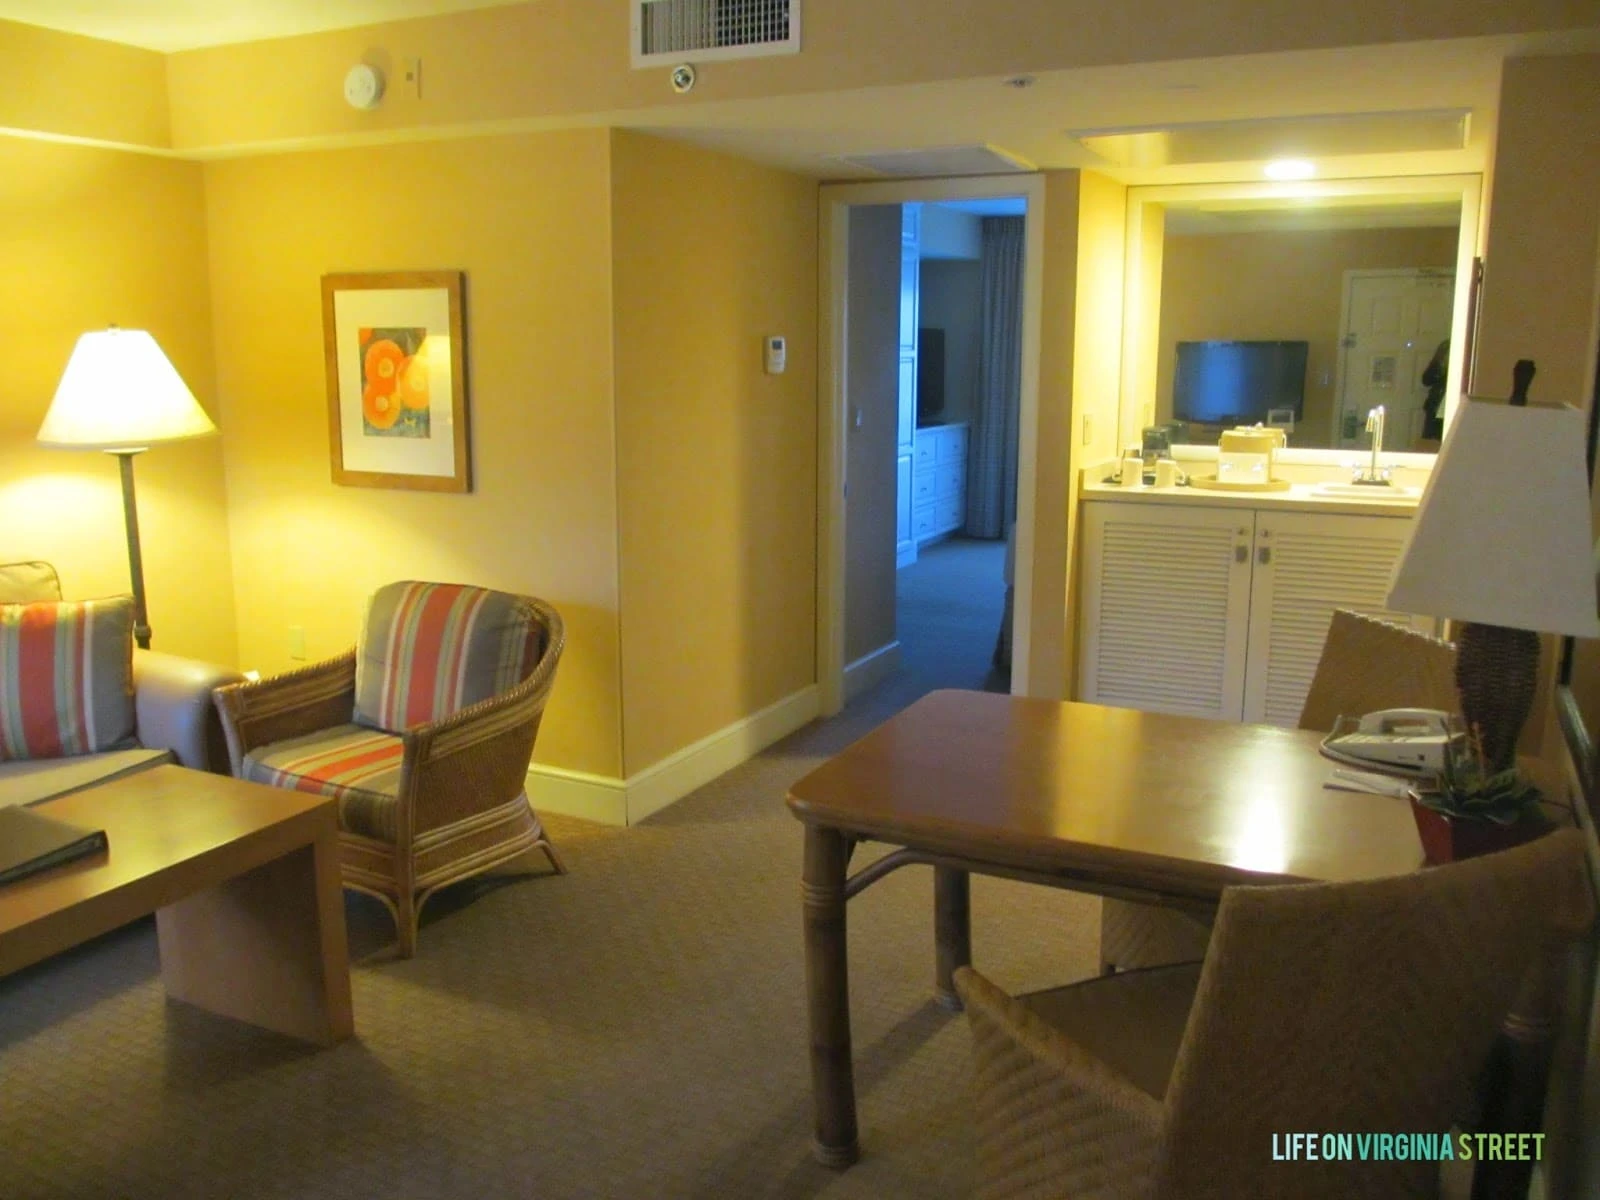 A small desk inside the hotel room.